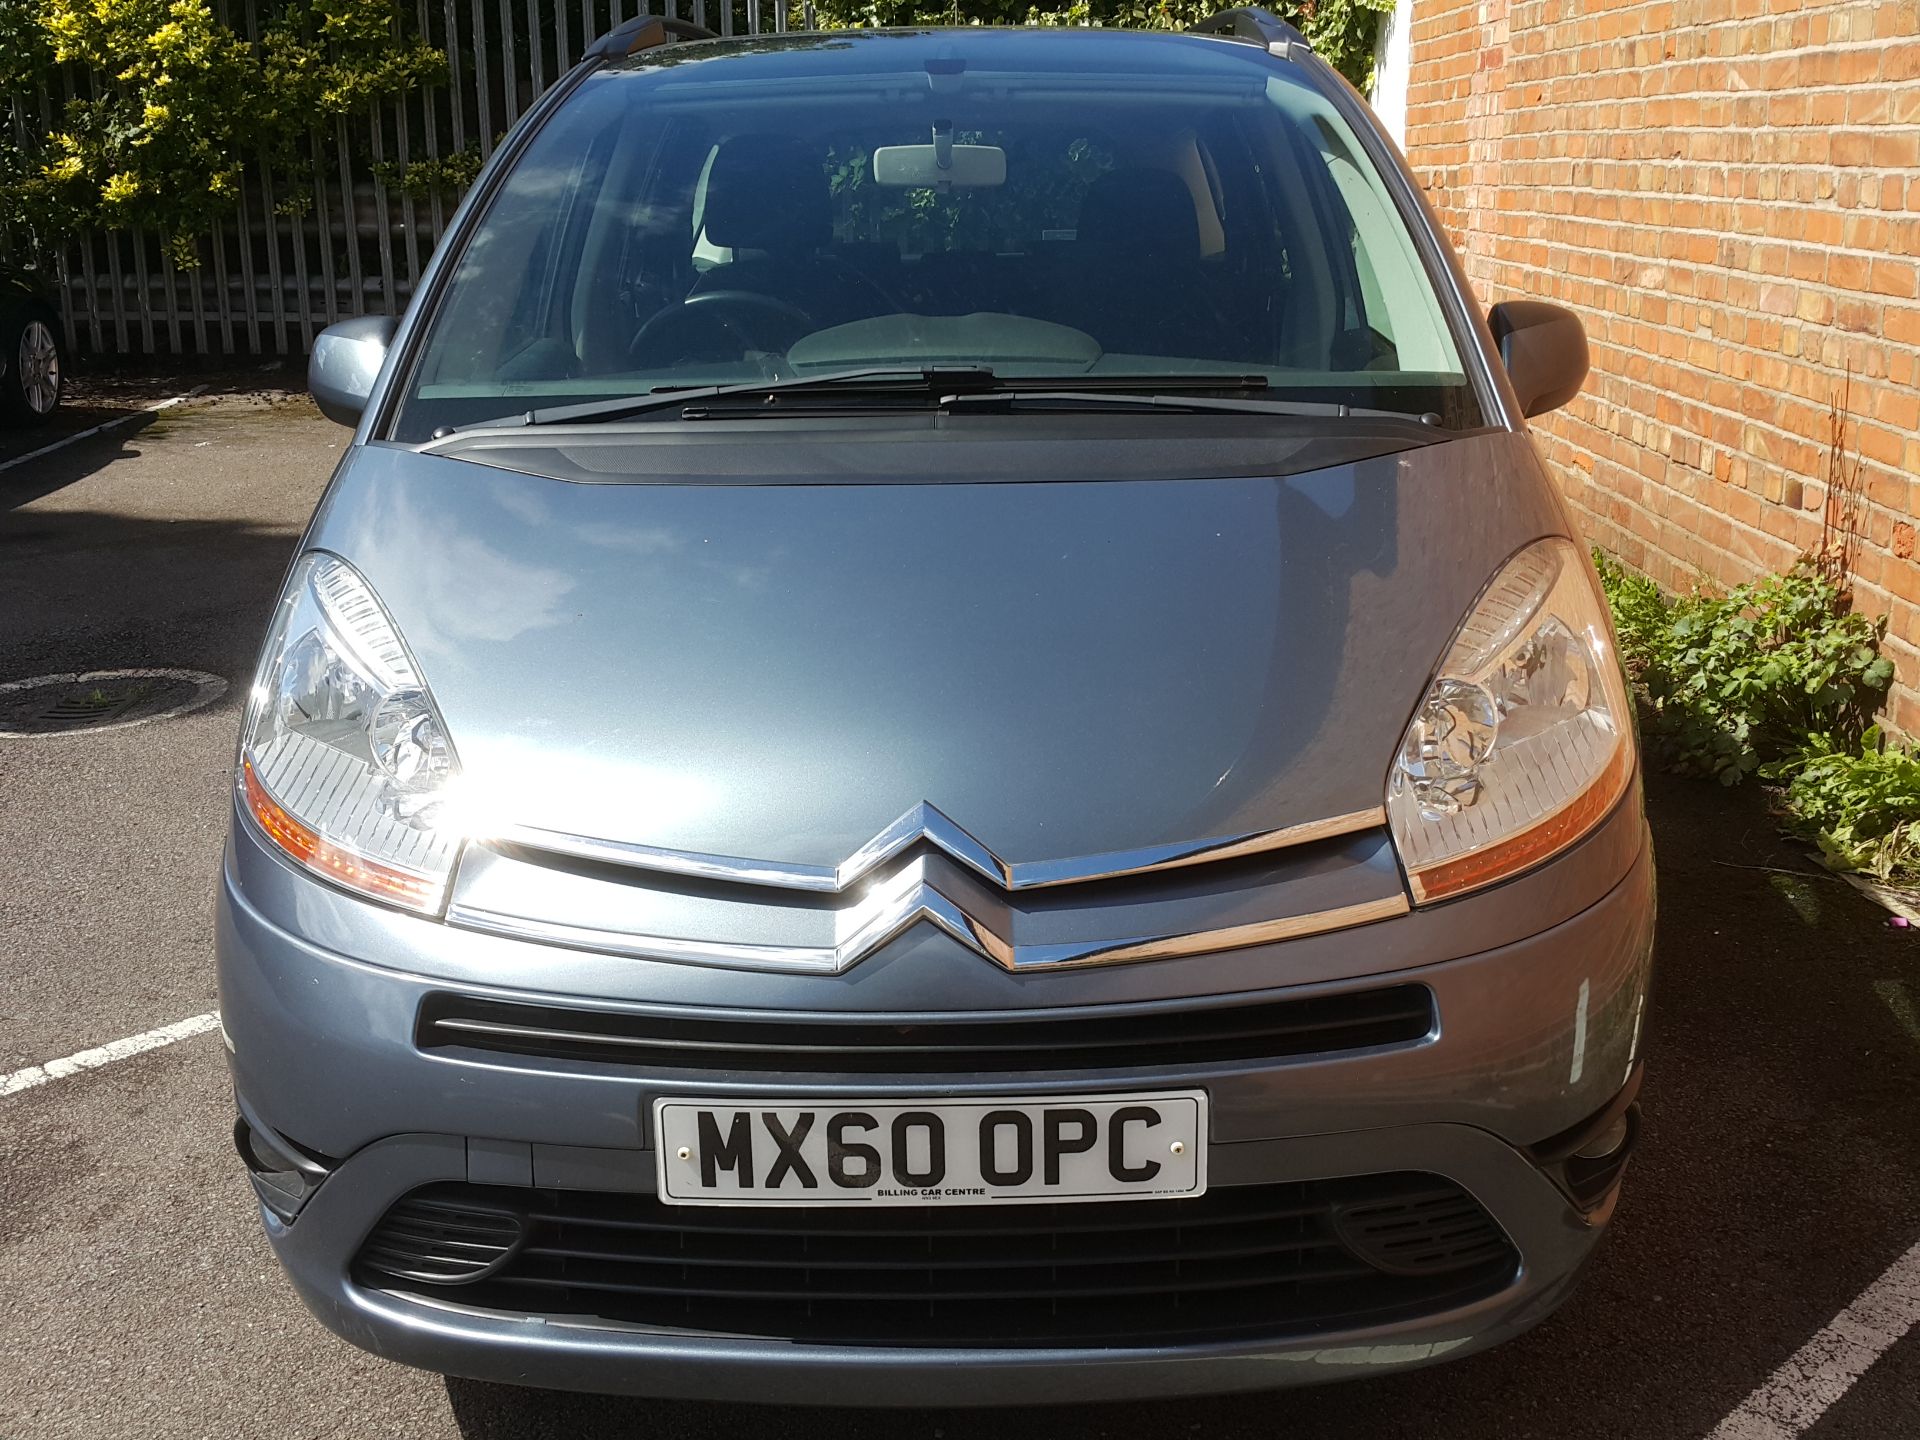 CITROEN C4 GRAND PICASSO VTR+ 7 SEATER - Image 4 of 19